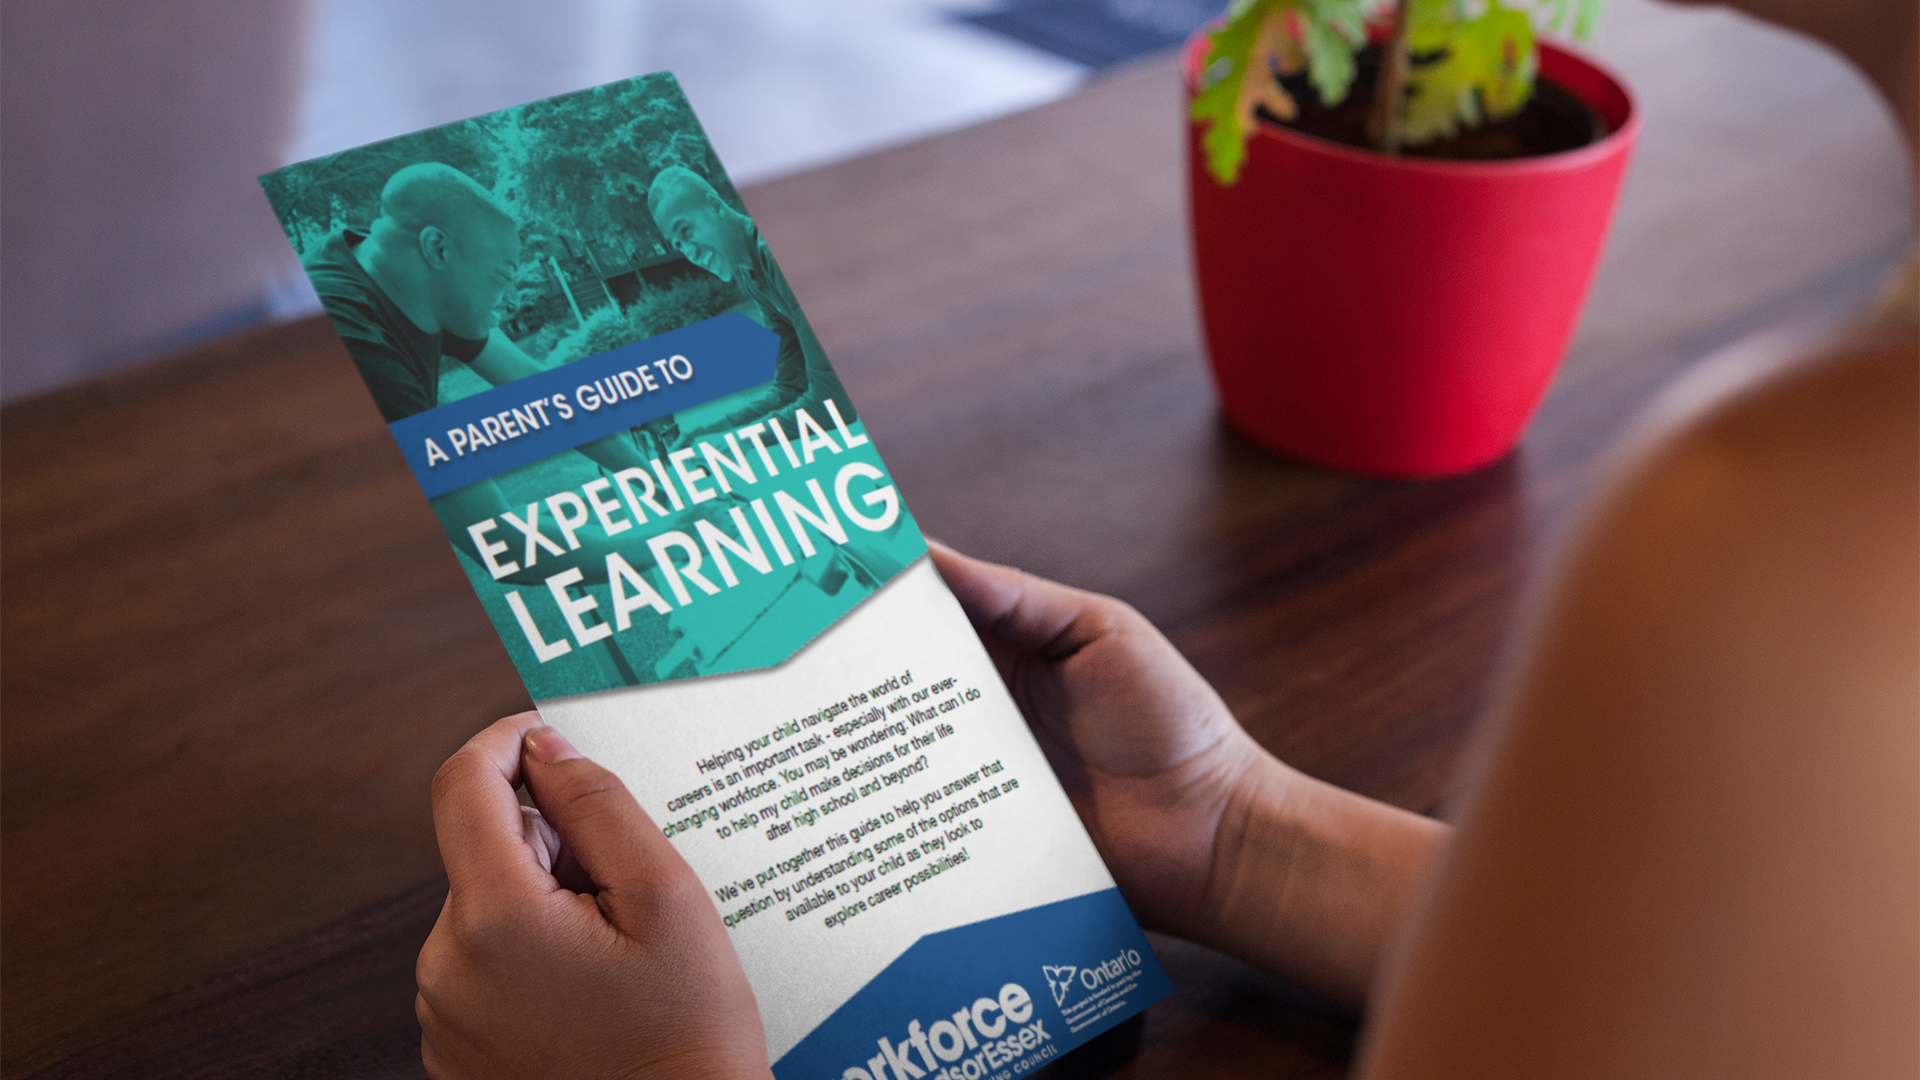 Person holding A Parent's Guide to Experiential Learning